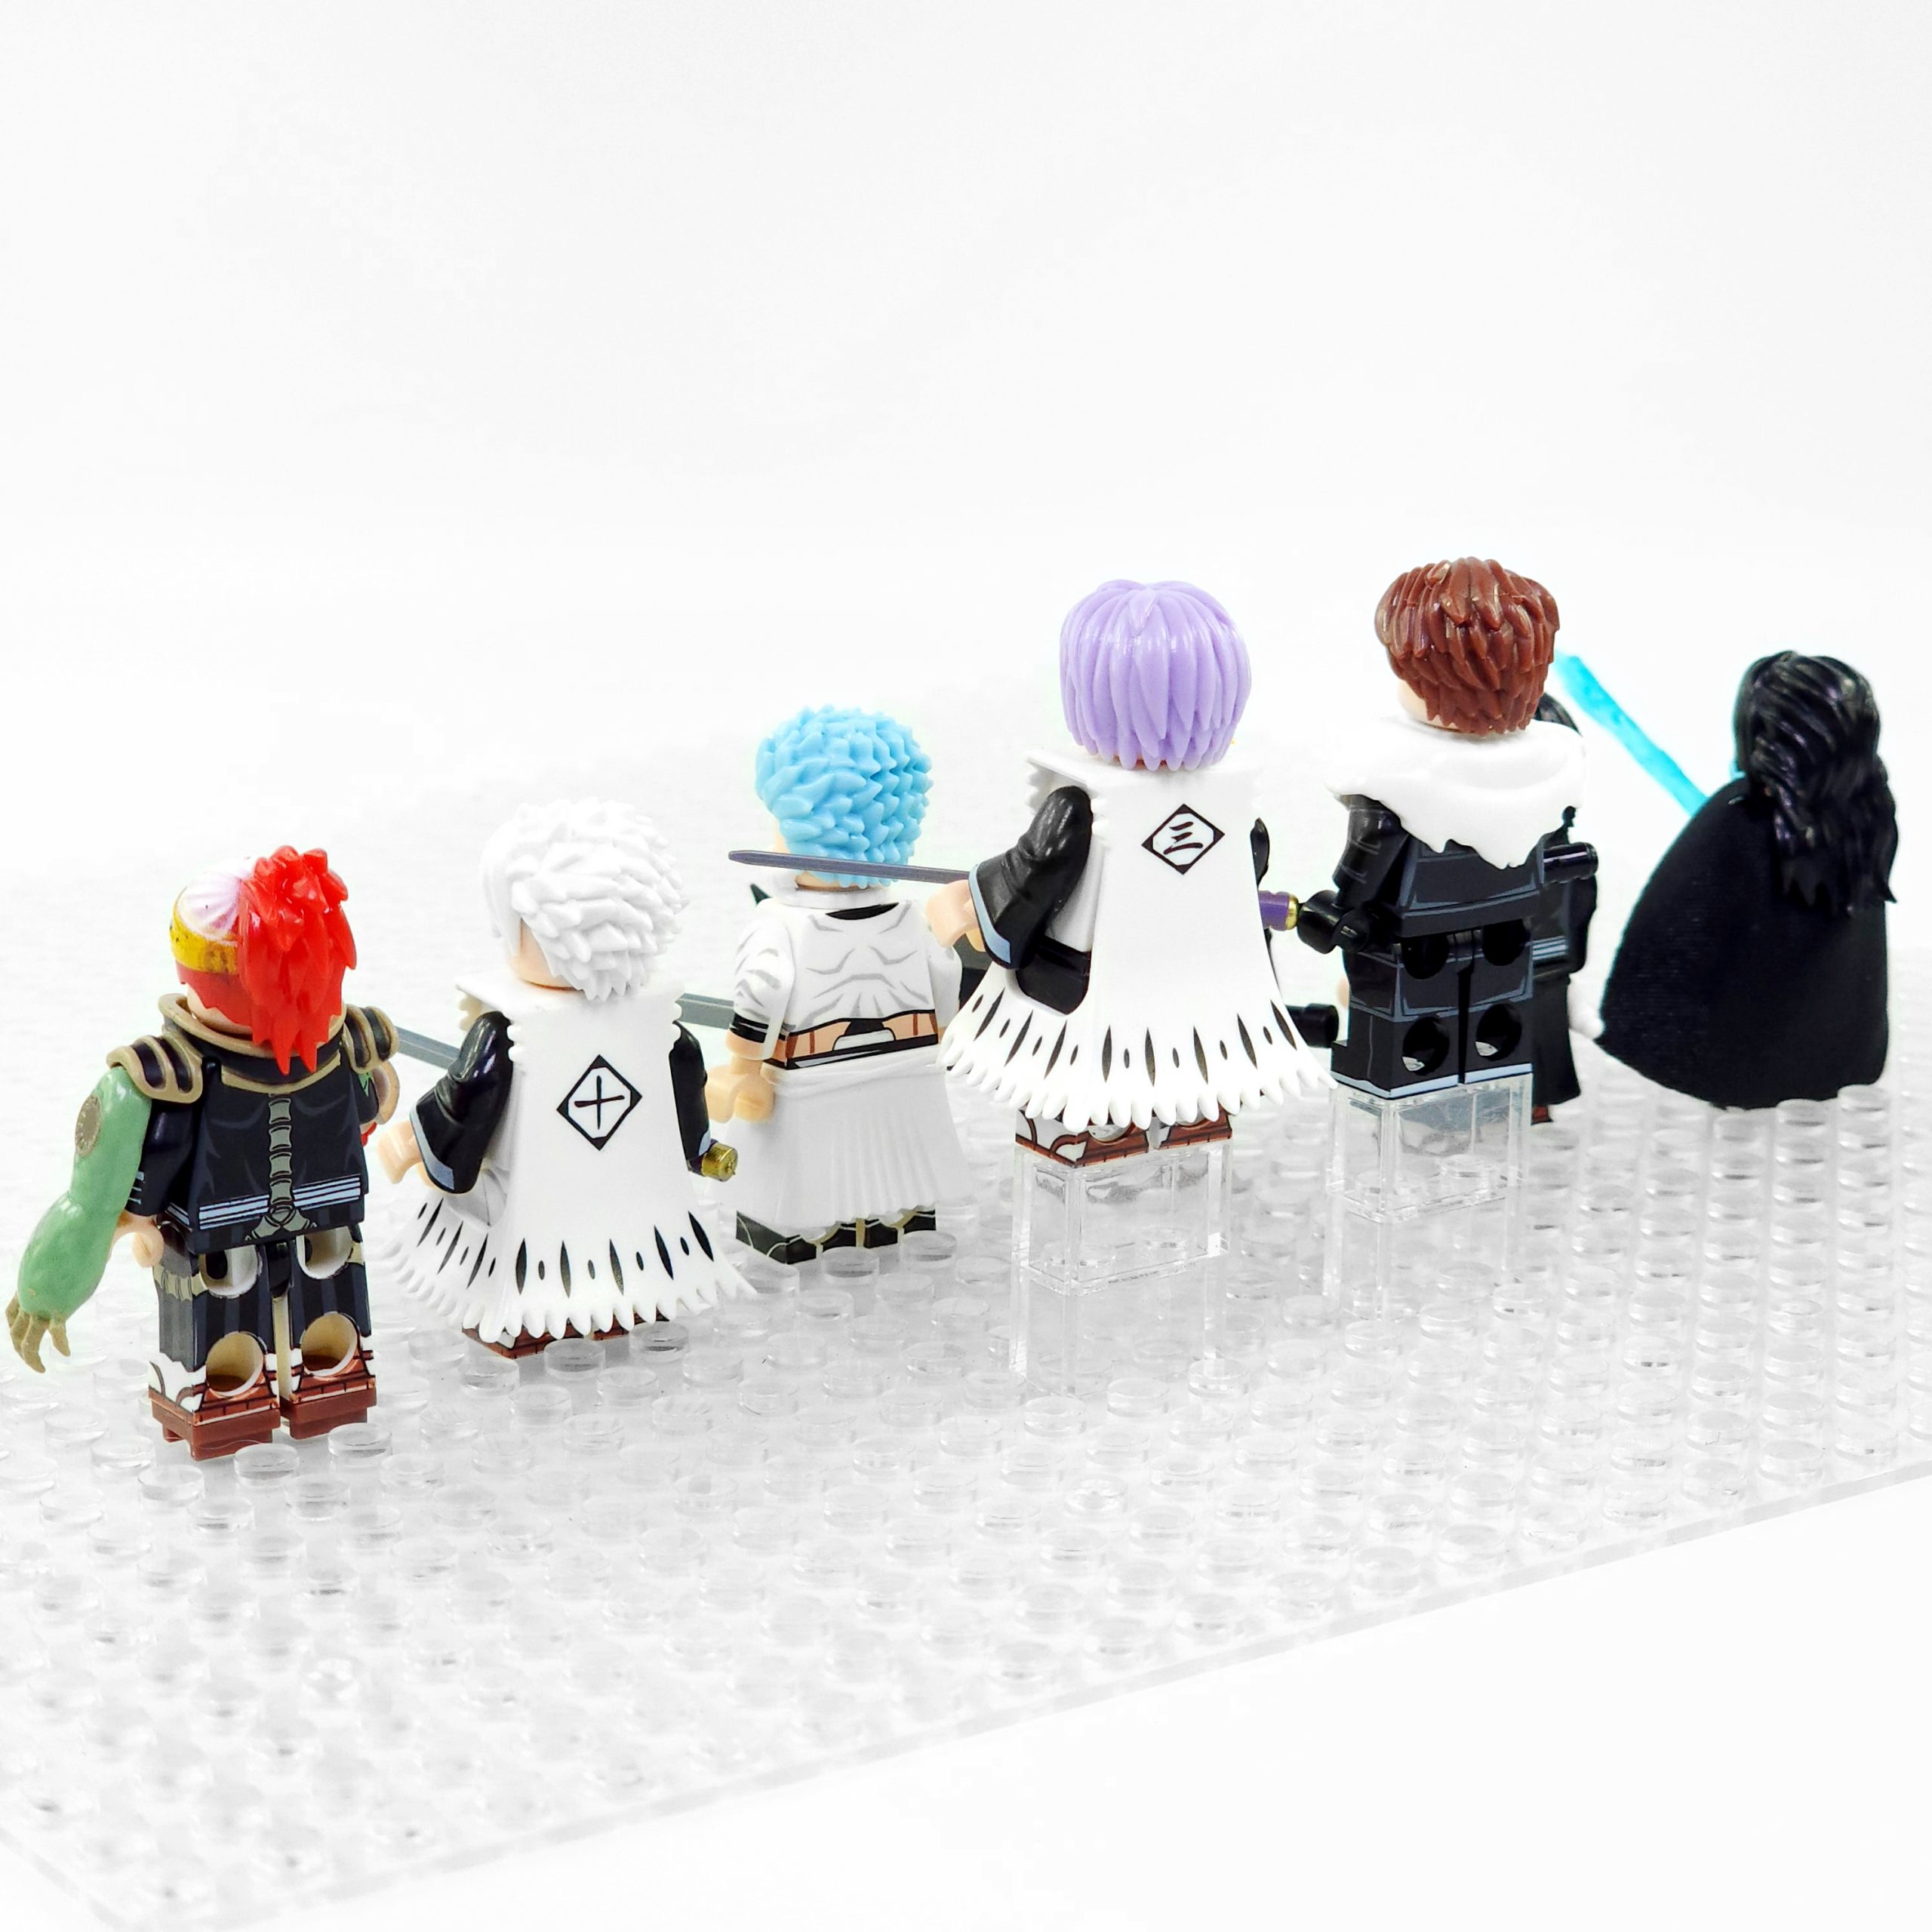 Bleach Anime Series Minifigure Set of 8pcs With Weapons & Accessories